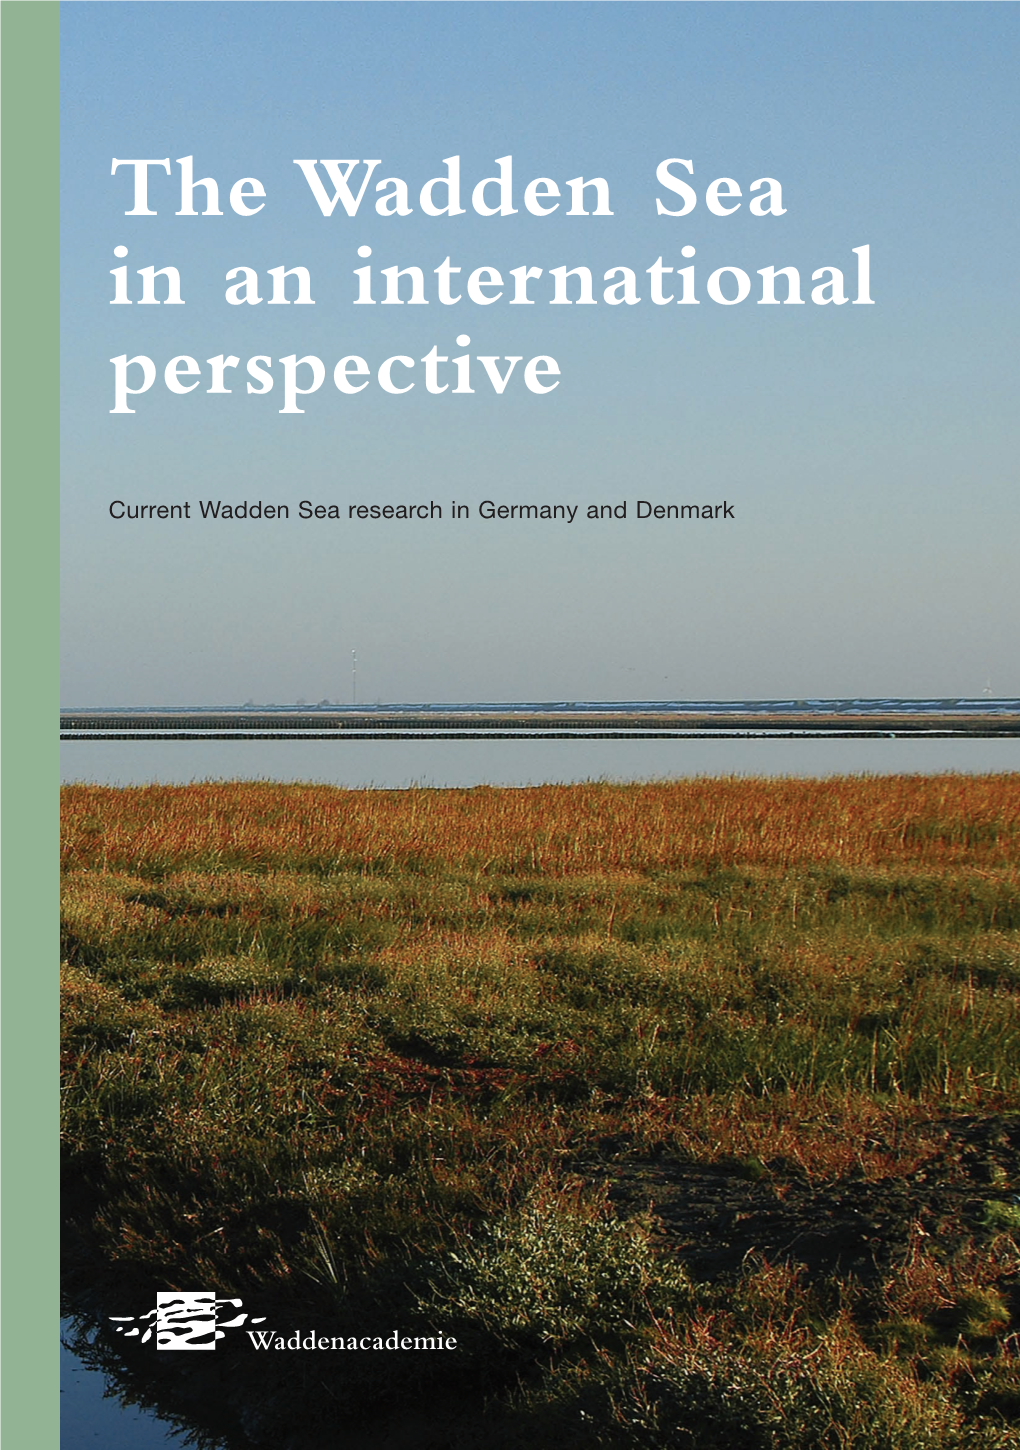 The Wadden Sea in an International Perspective